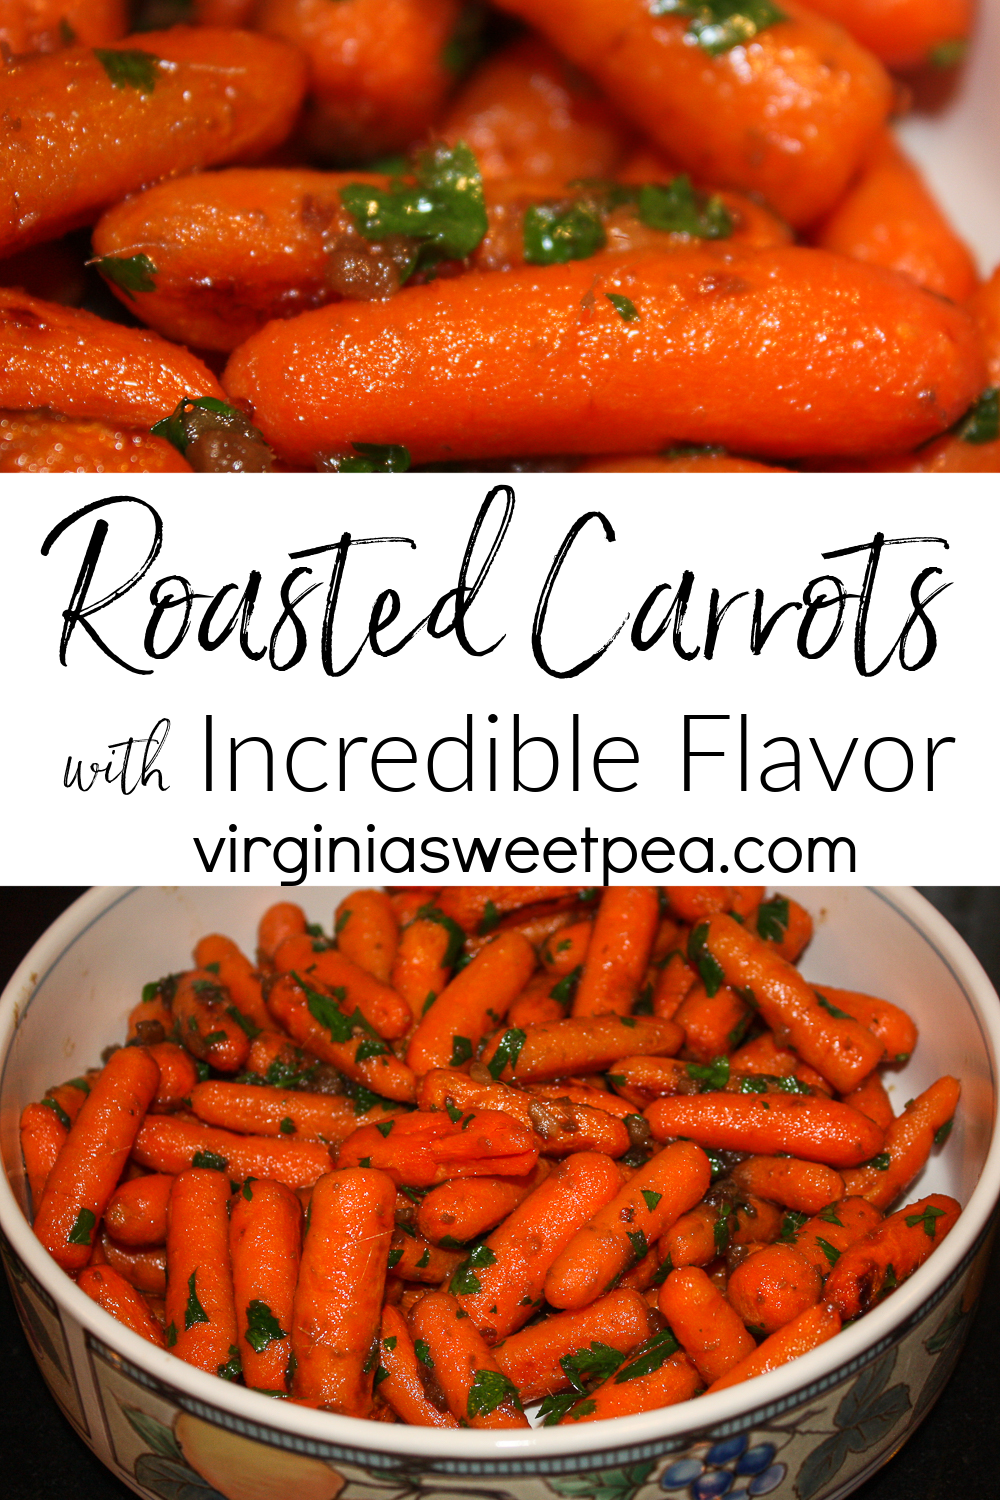 Roasted Carrots with Incredible Flavor